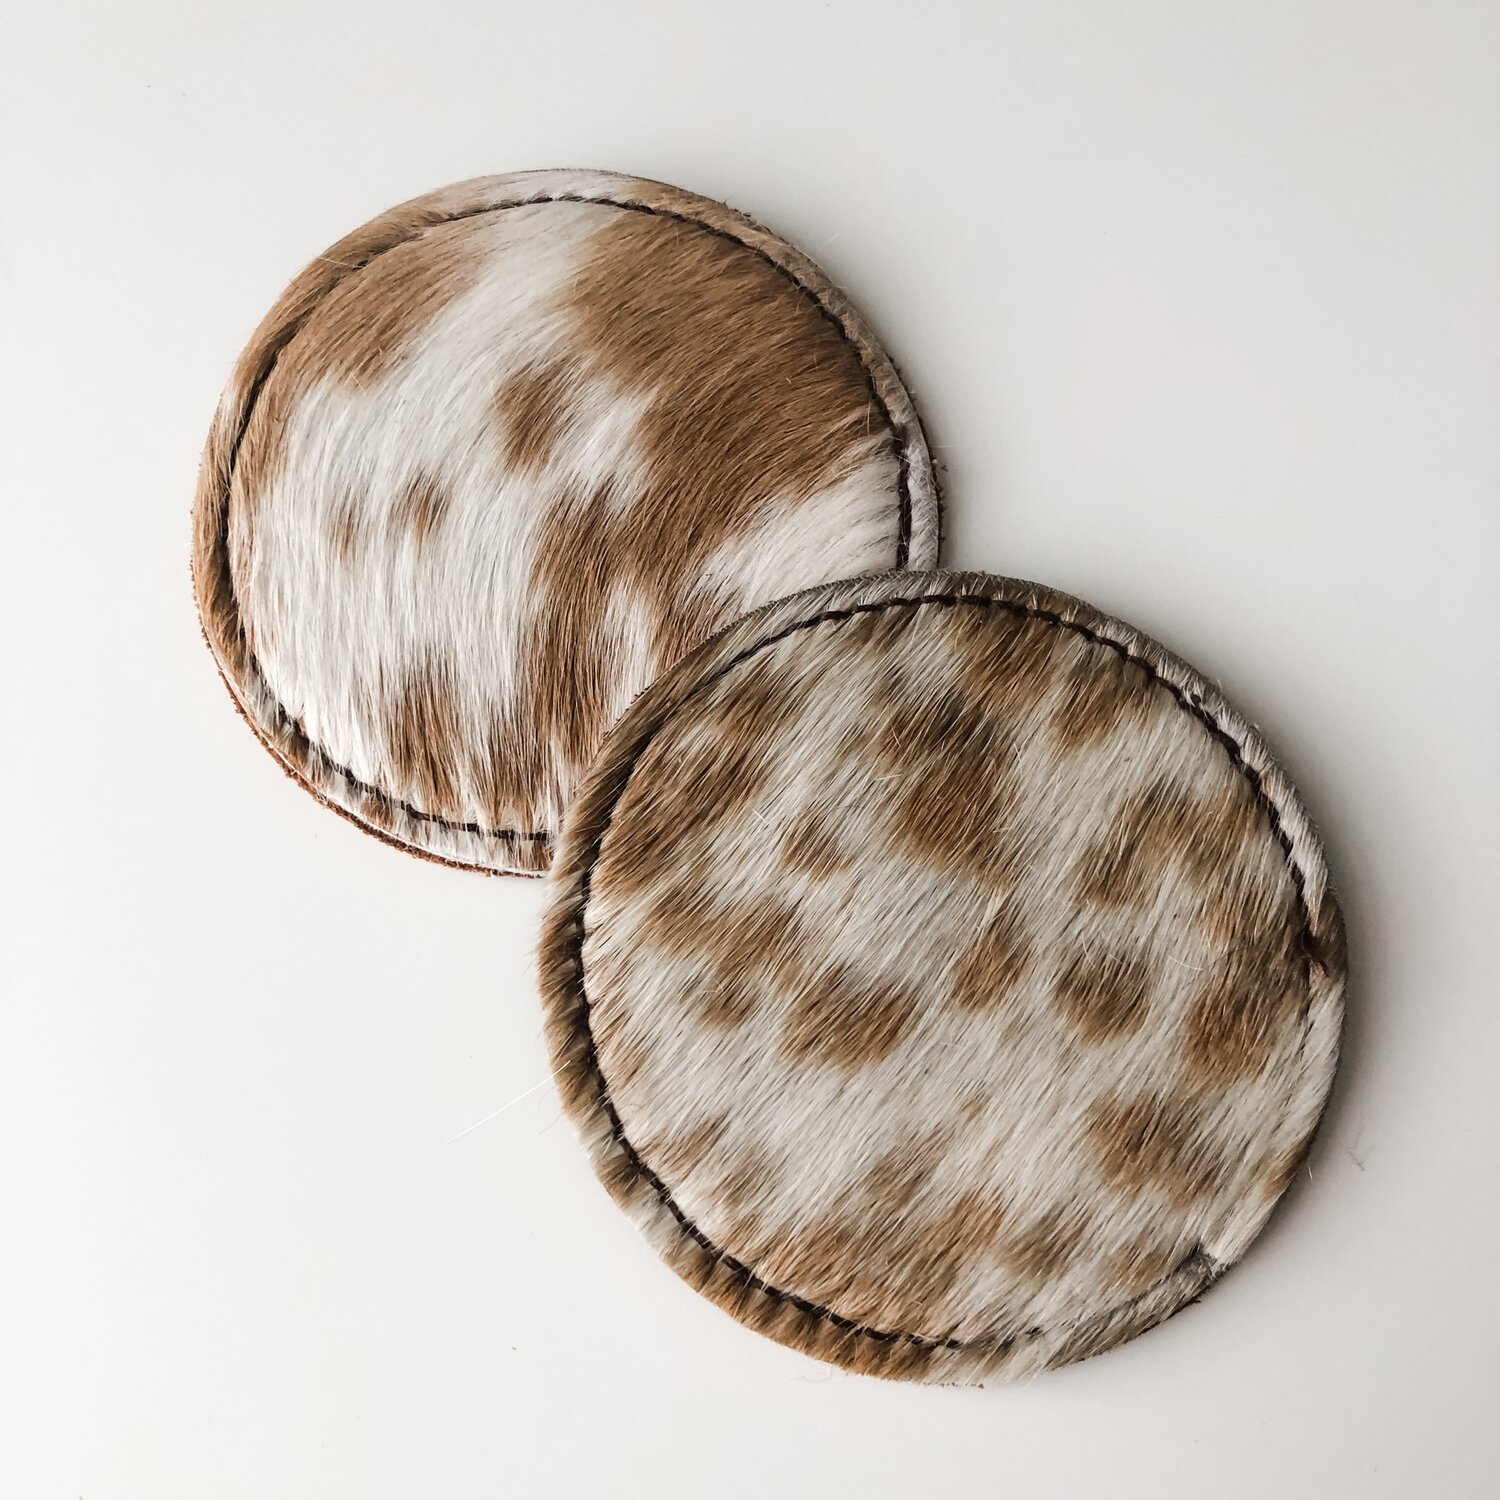 Cowhide Coasters-4pc Set – More Than Buckles Western Brand